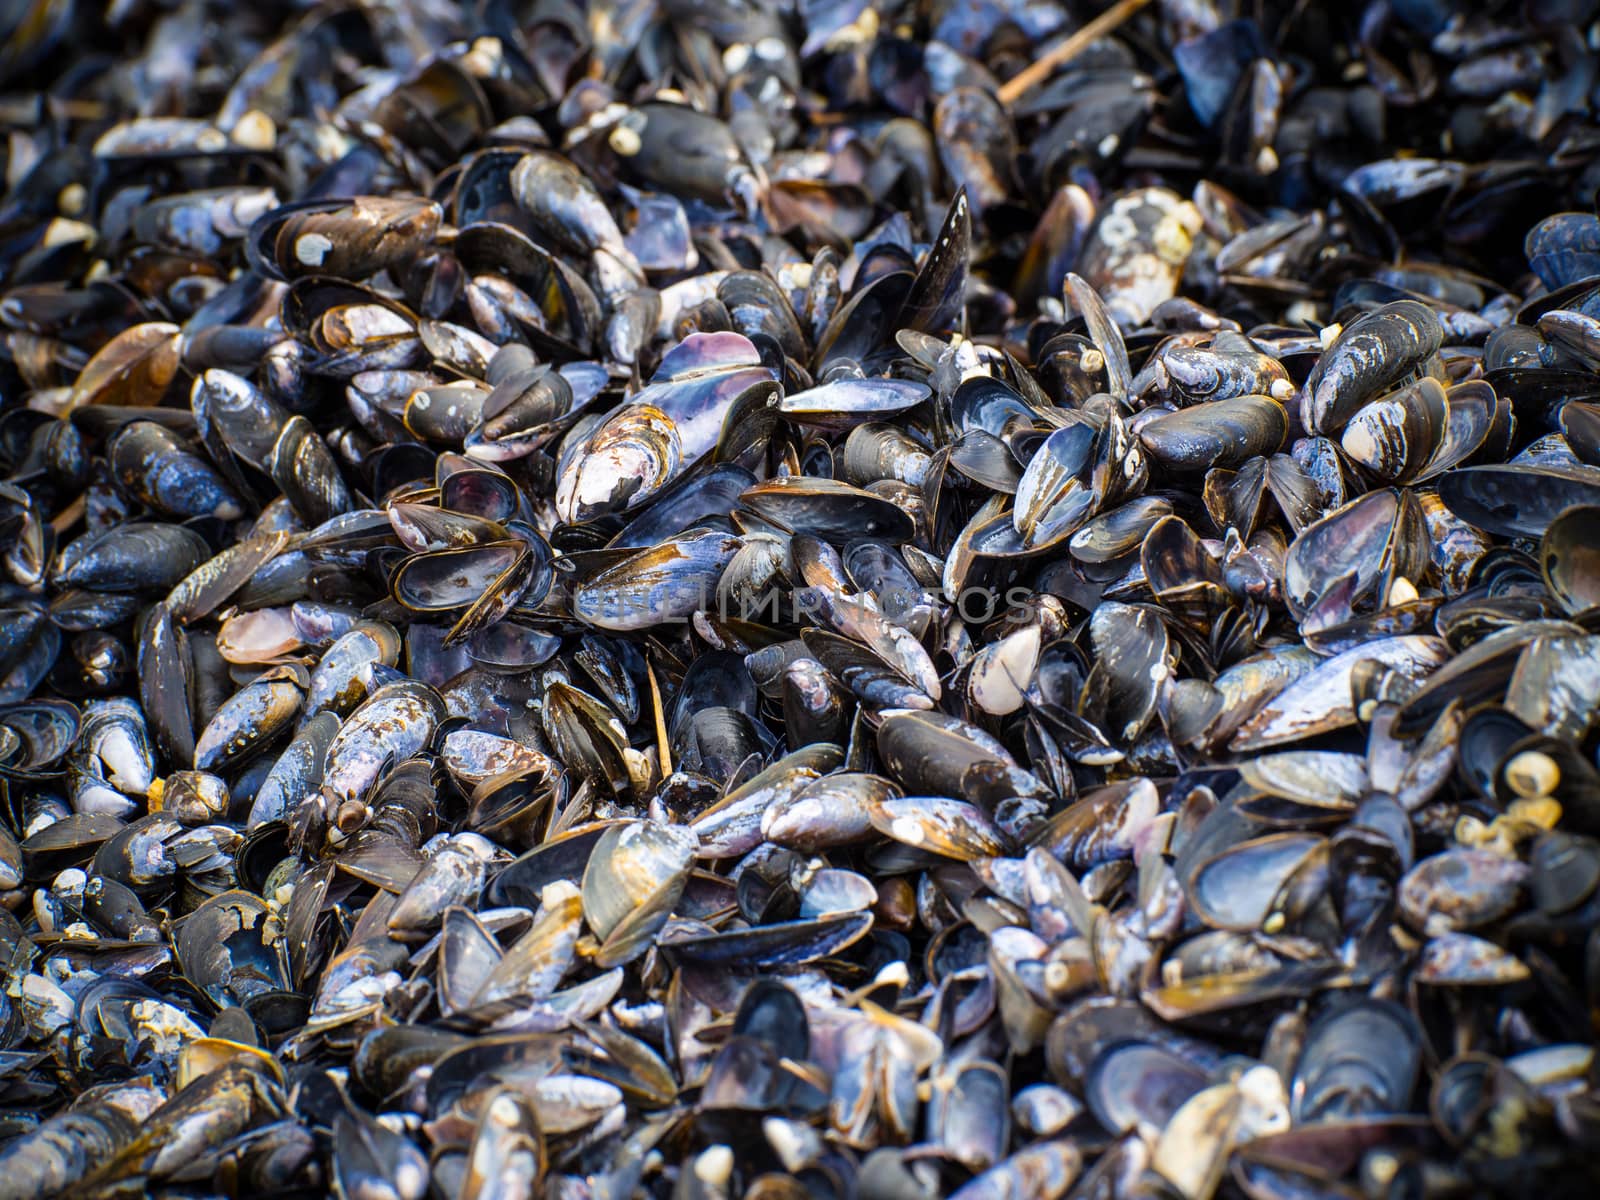 A pile of mussels